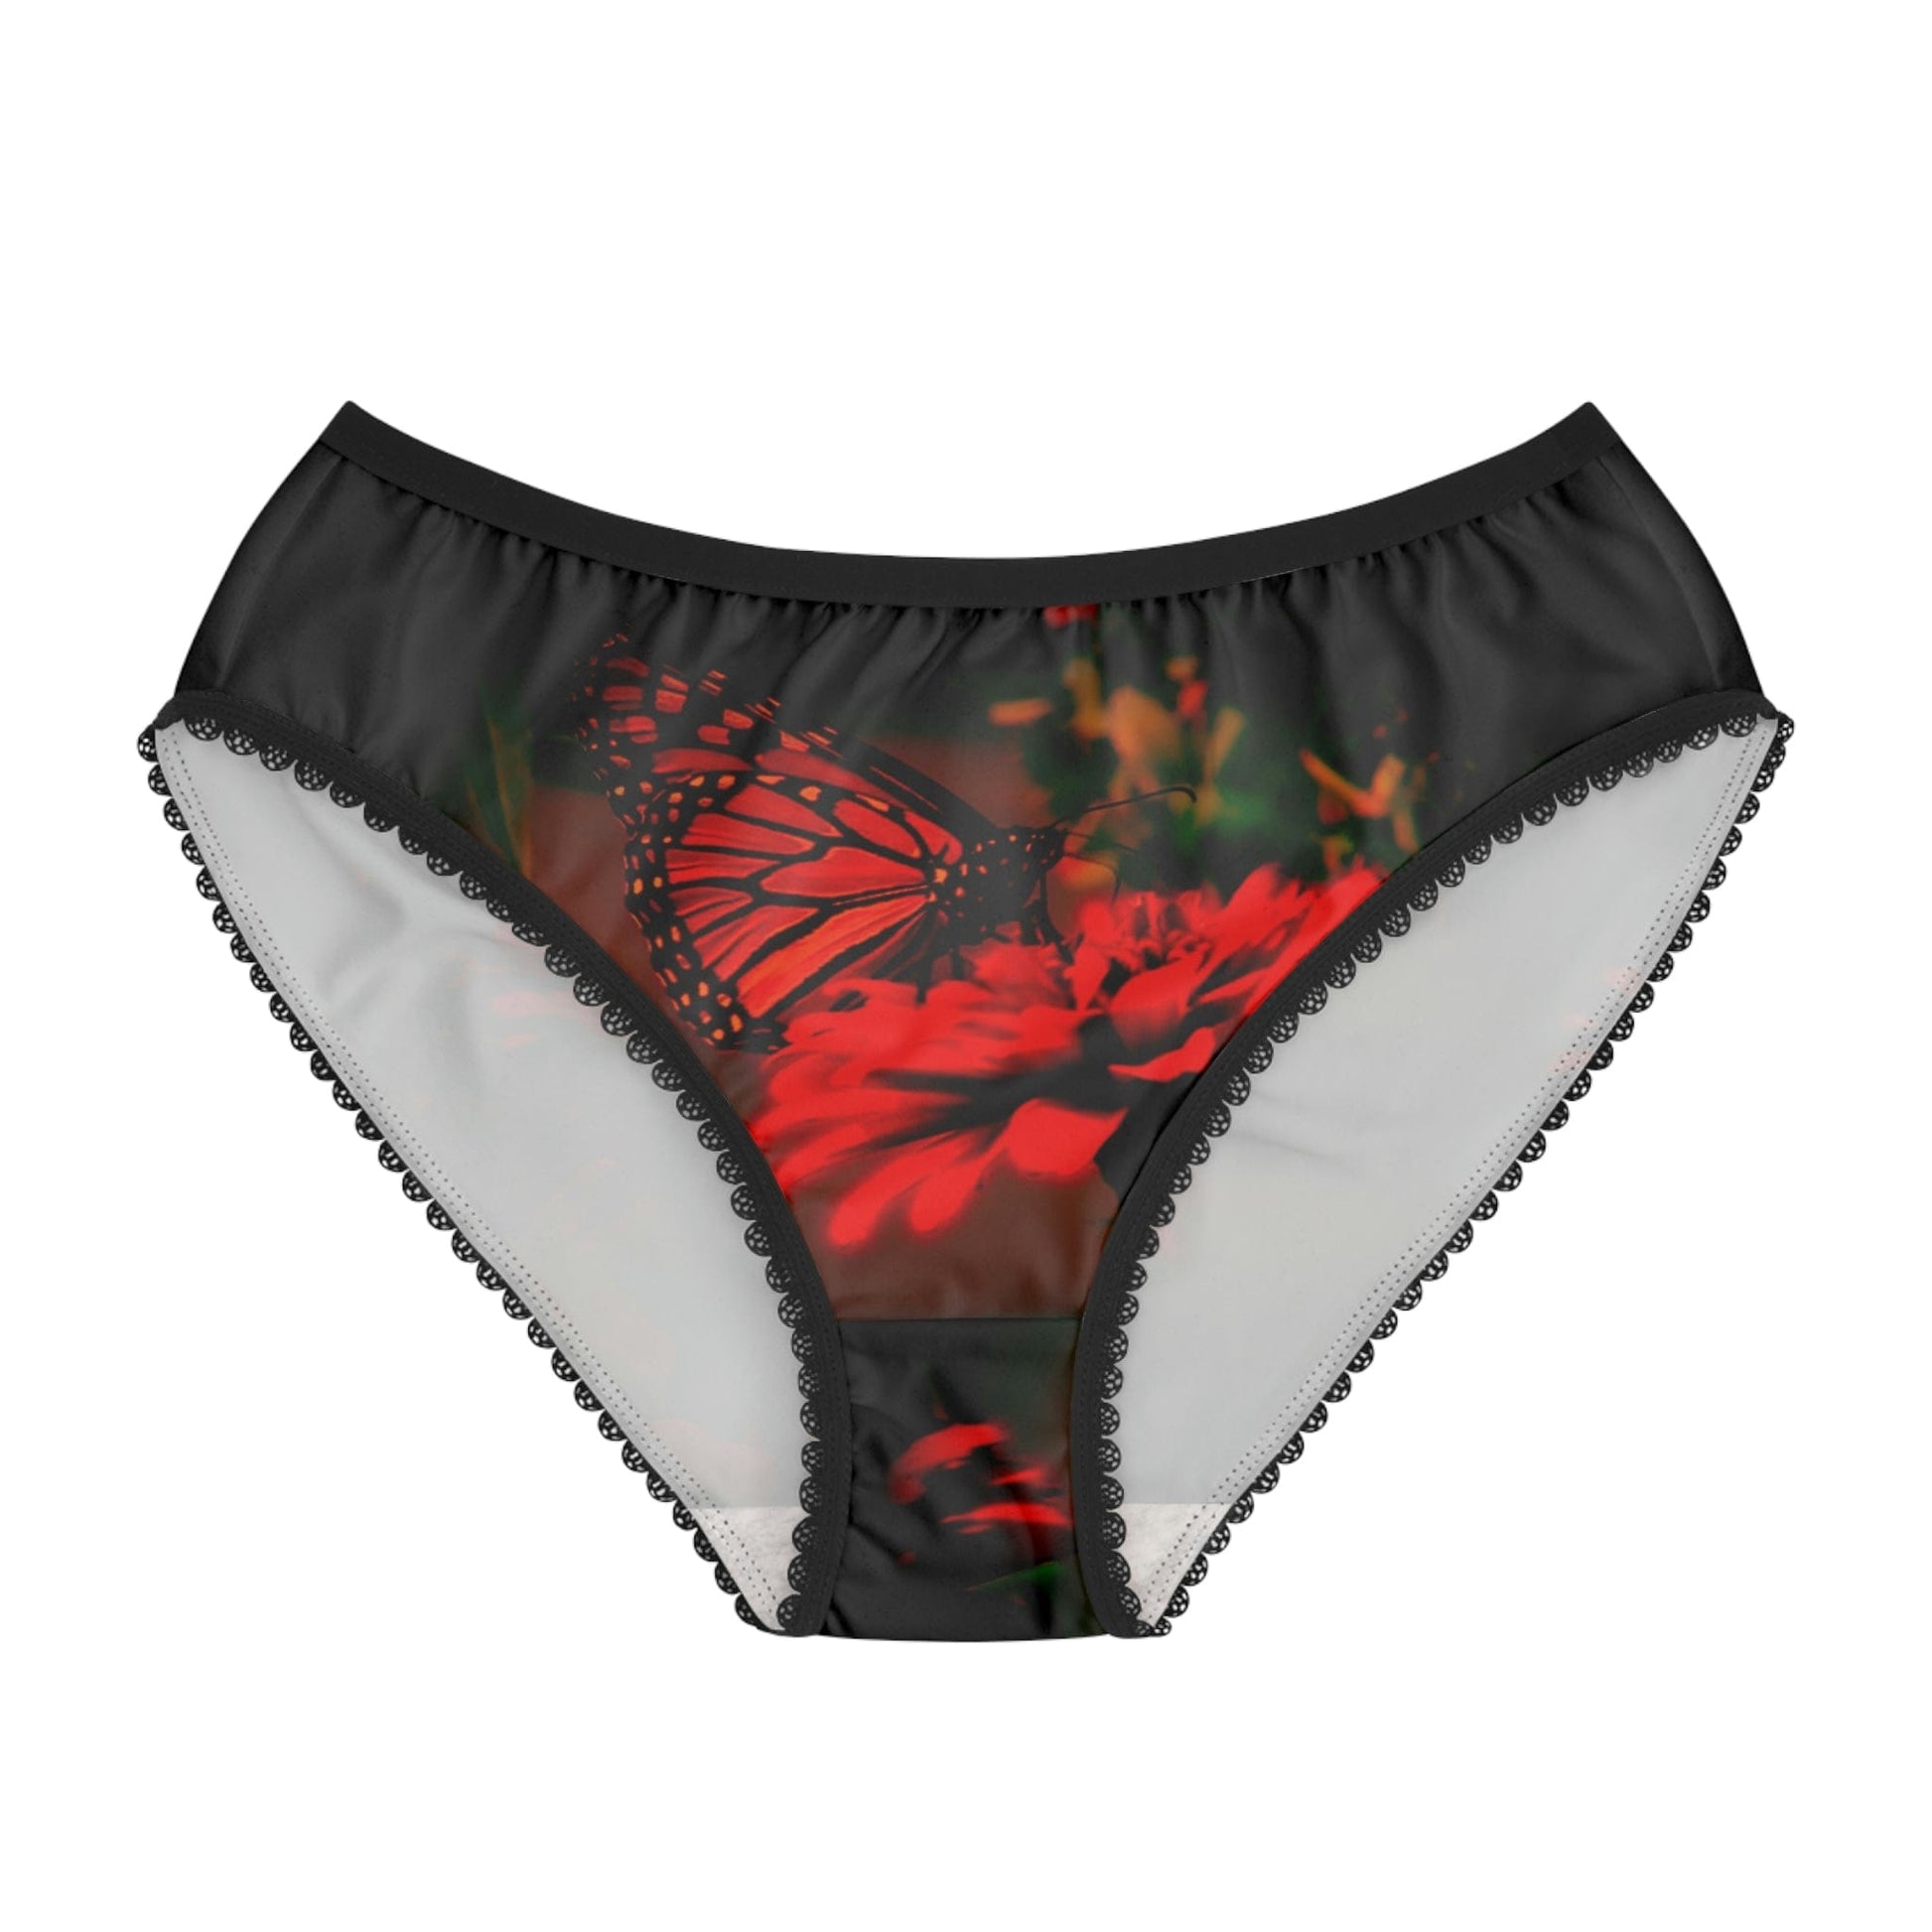 Briefs - INTIME NATURE - Concept Inspired by SPECIES Collection